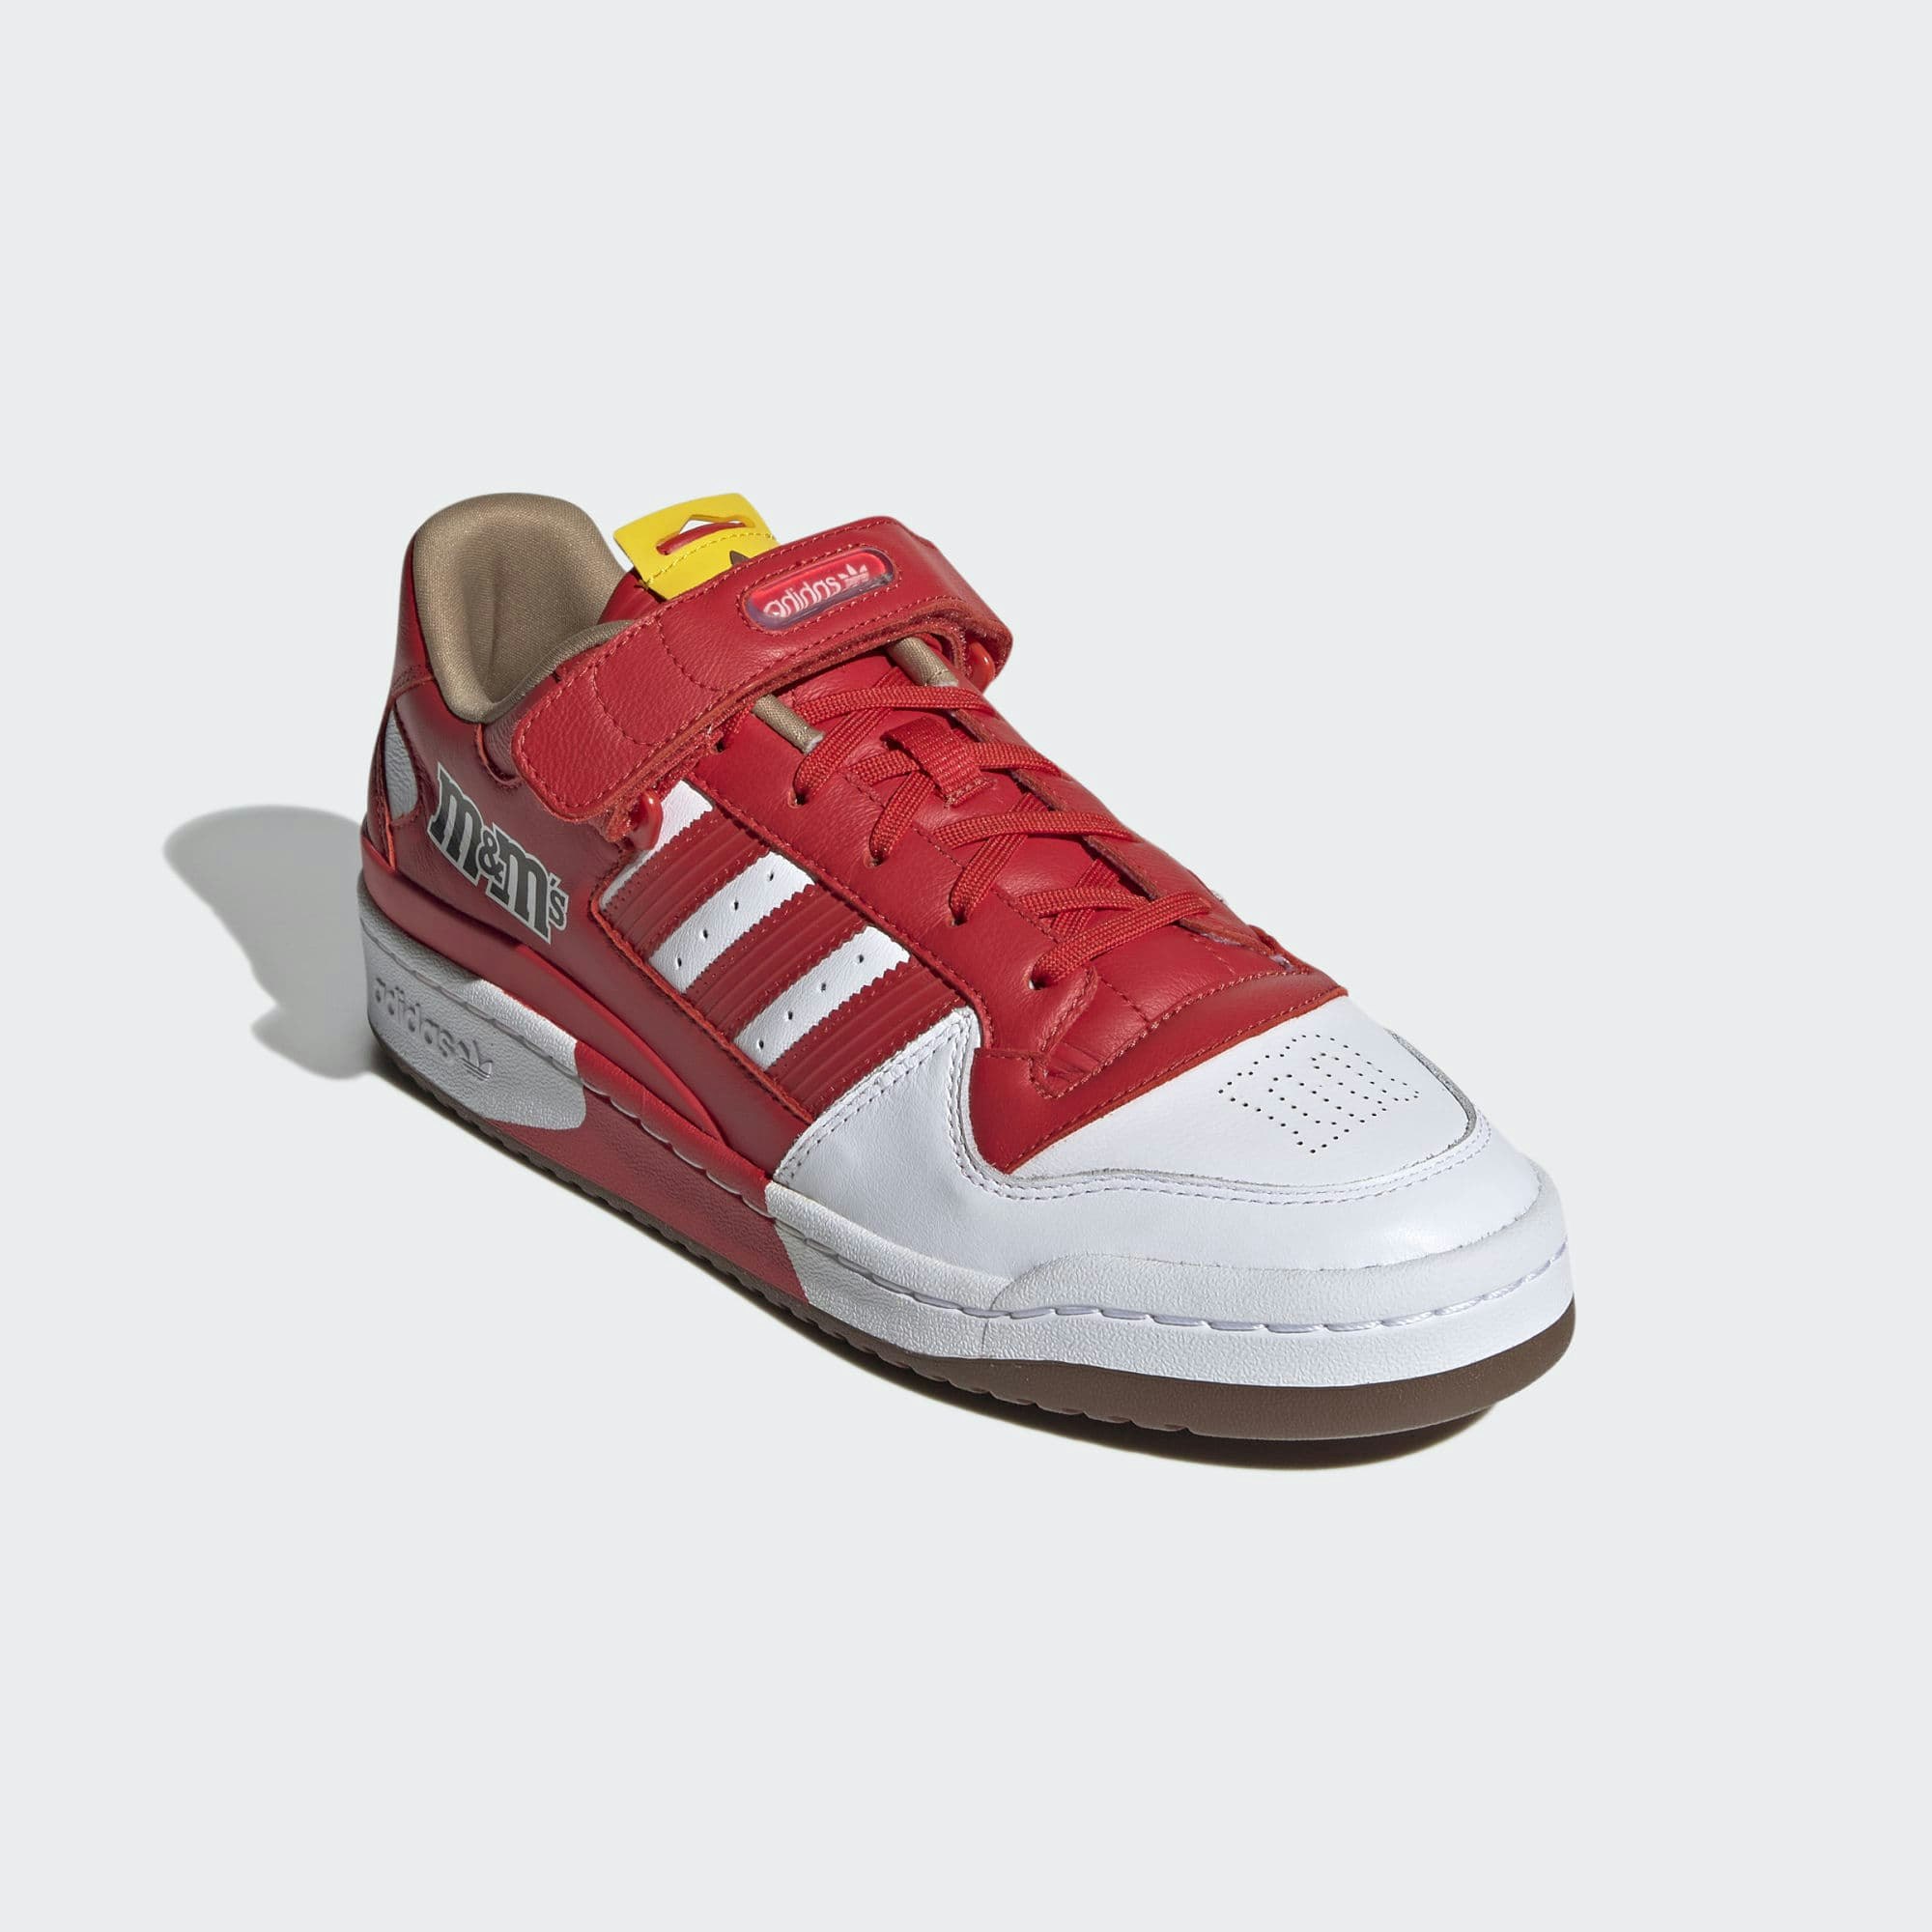 M&M’s x adidas Forum Low "Red"